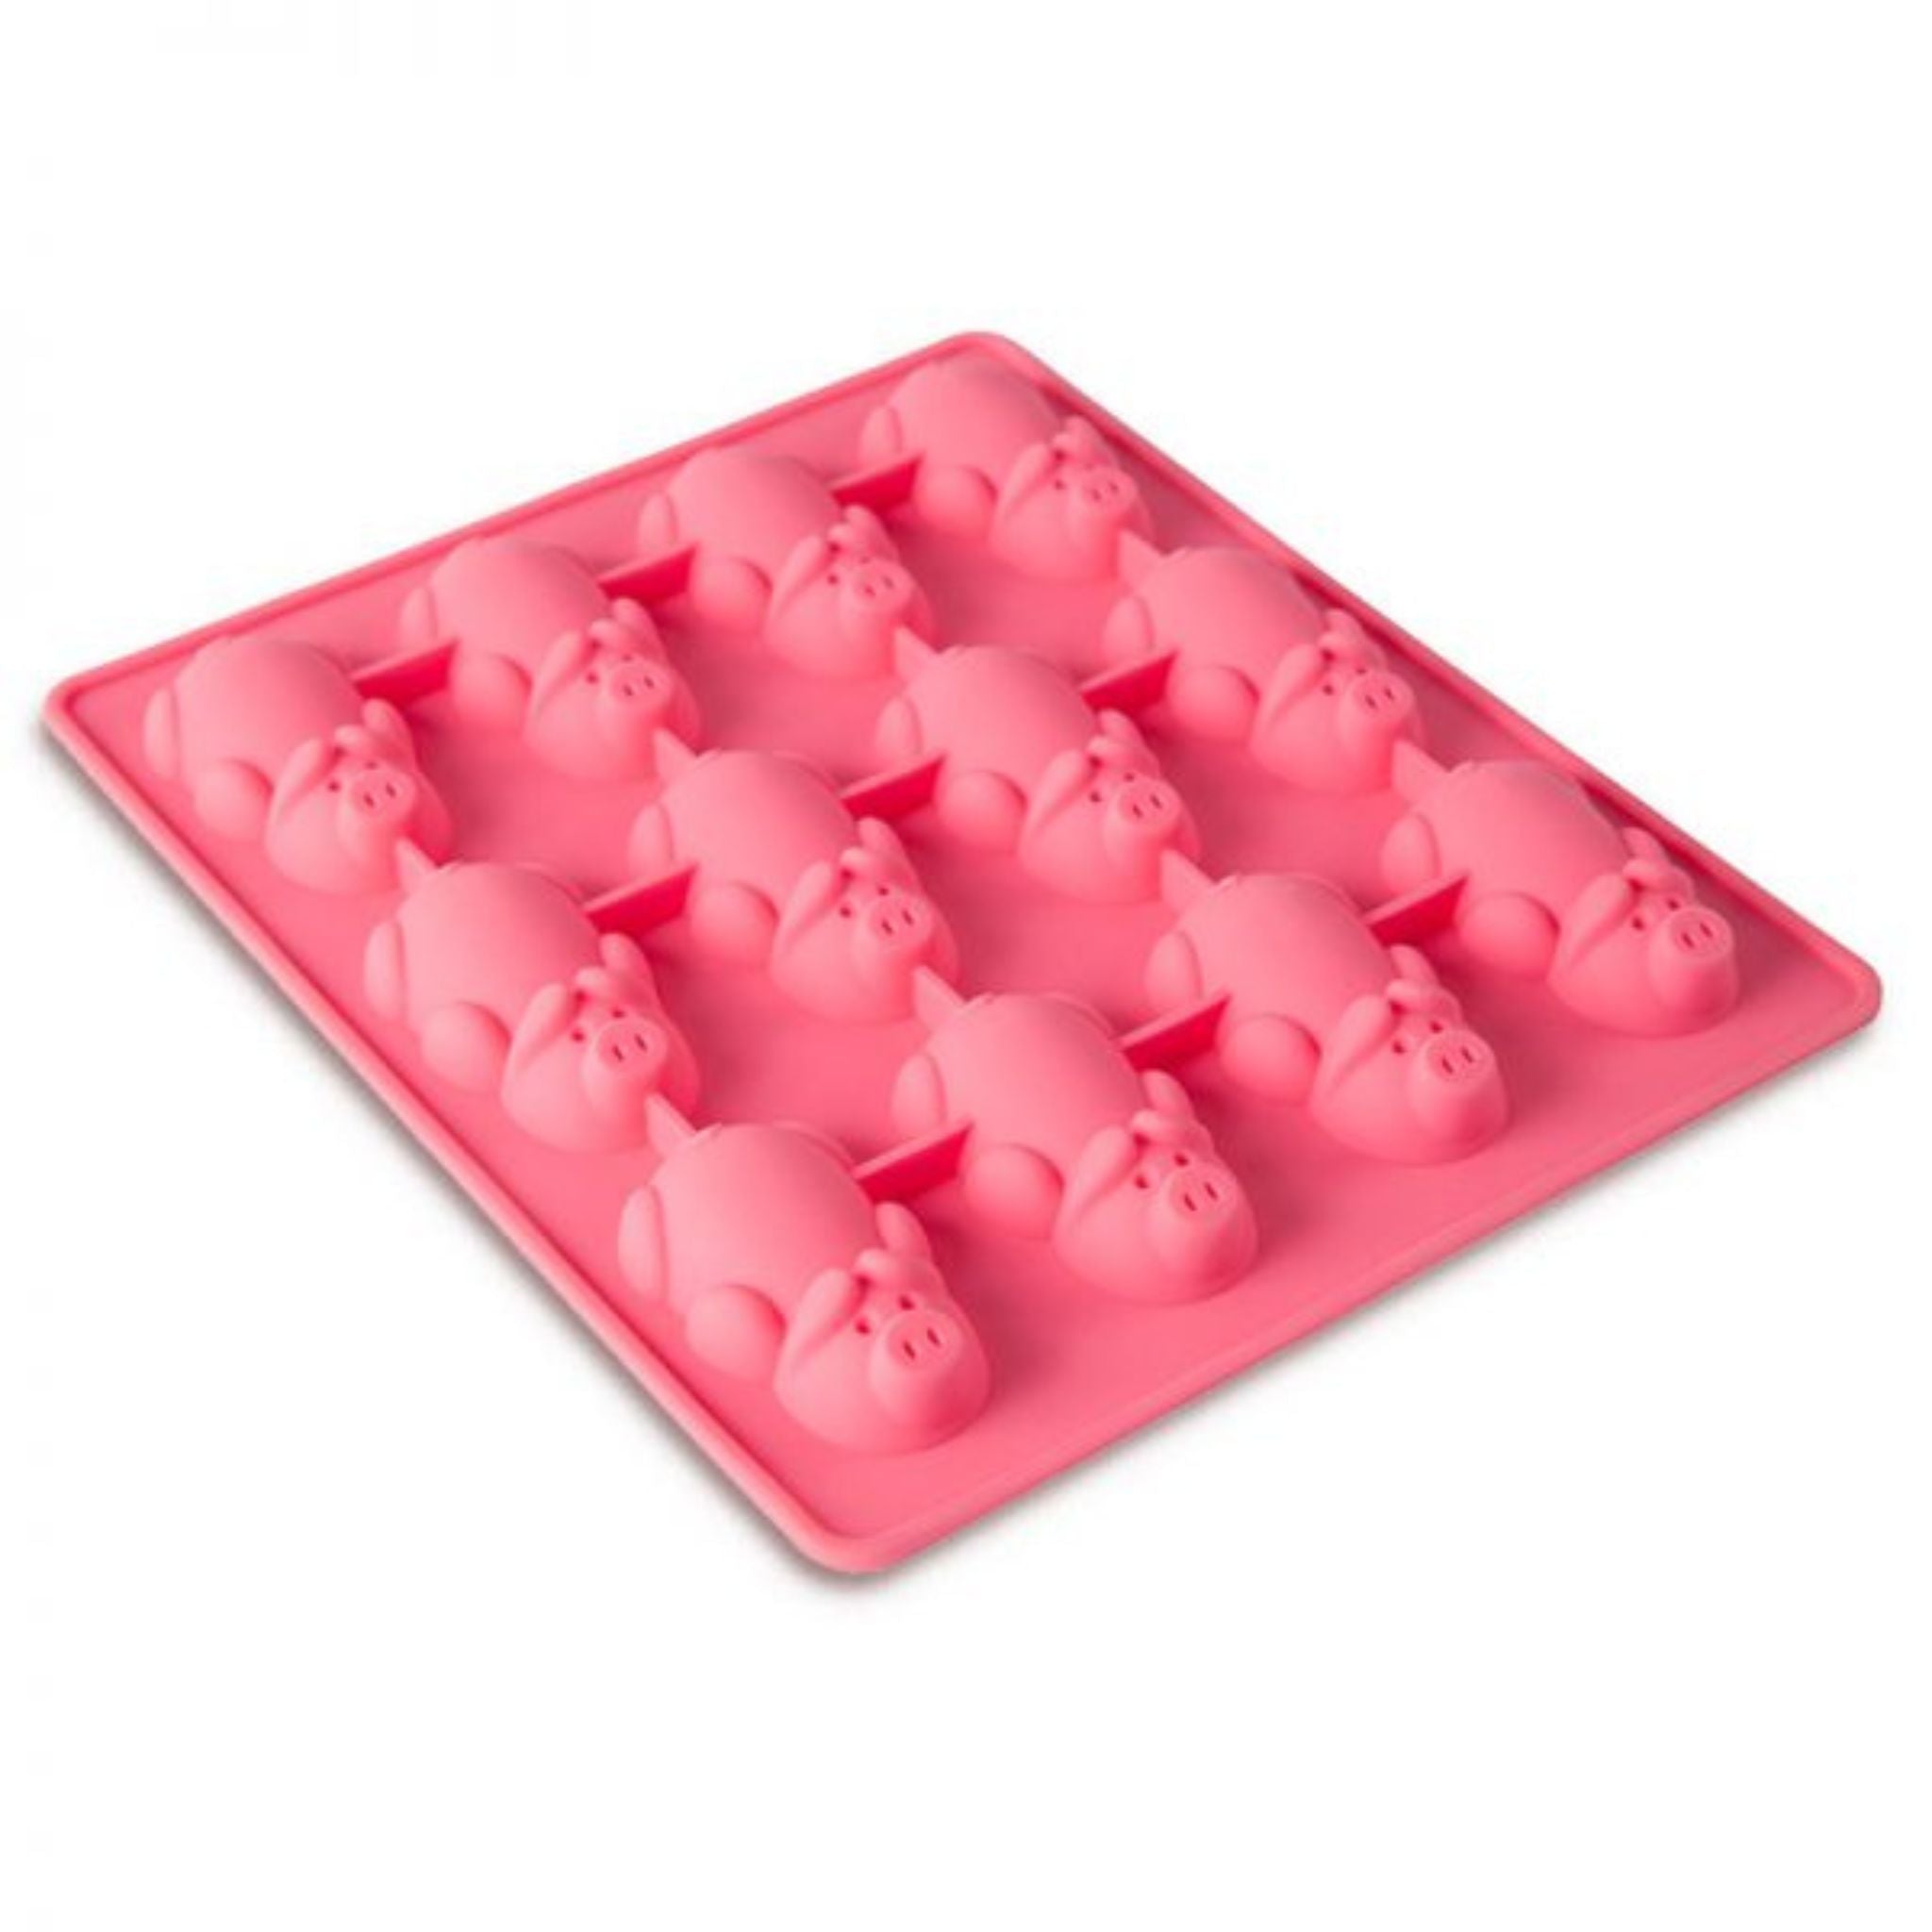 Oven Safe Silicone Mold - Pigs – Honeycomb Kitchen Shop